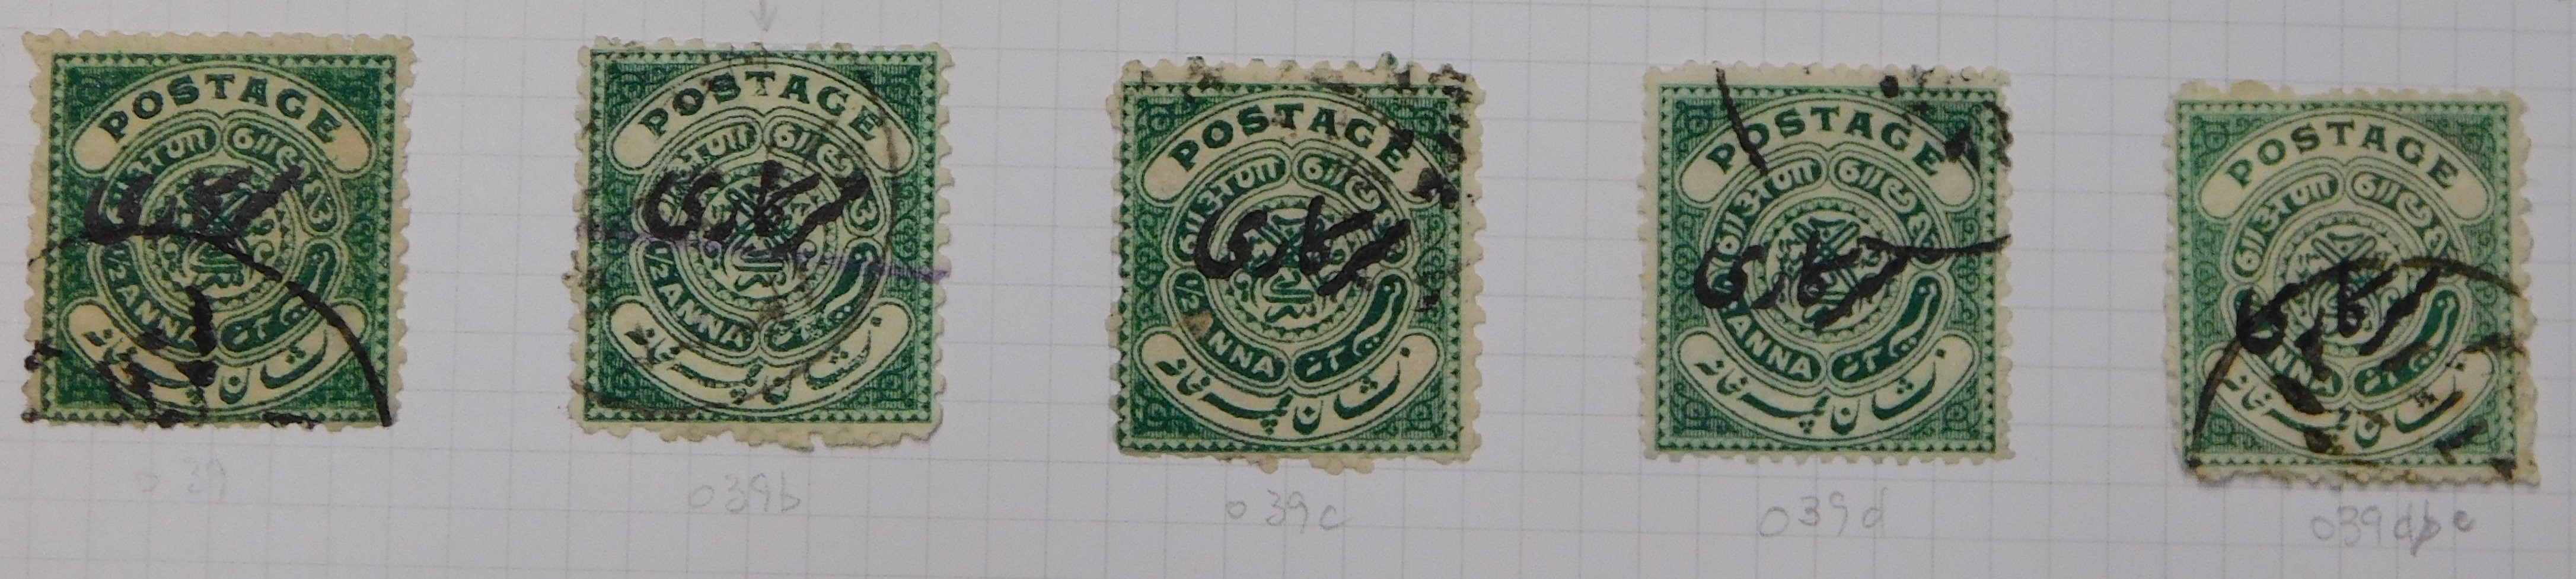 India (Hyderabad) Officials very fine used 1911-1912 035 to 039c, 038 P12.1/2 (Not catalogues) al 20 - Image 5 of 7